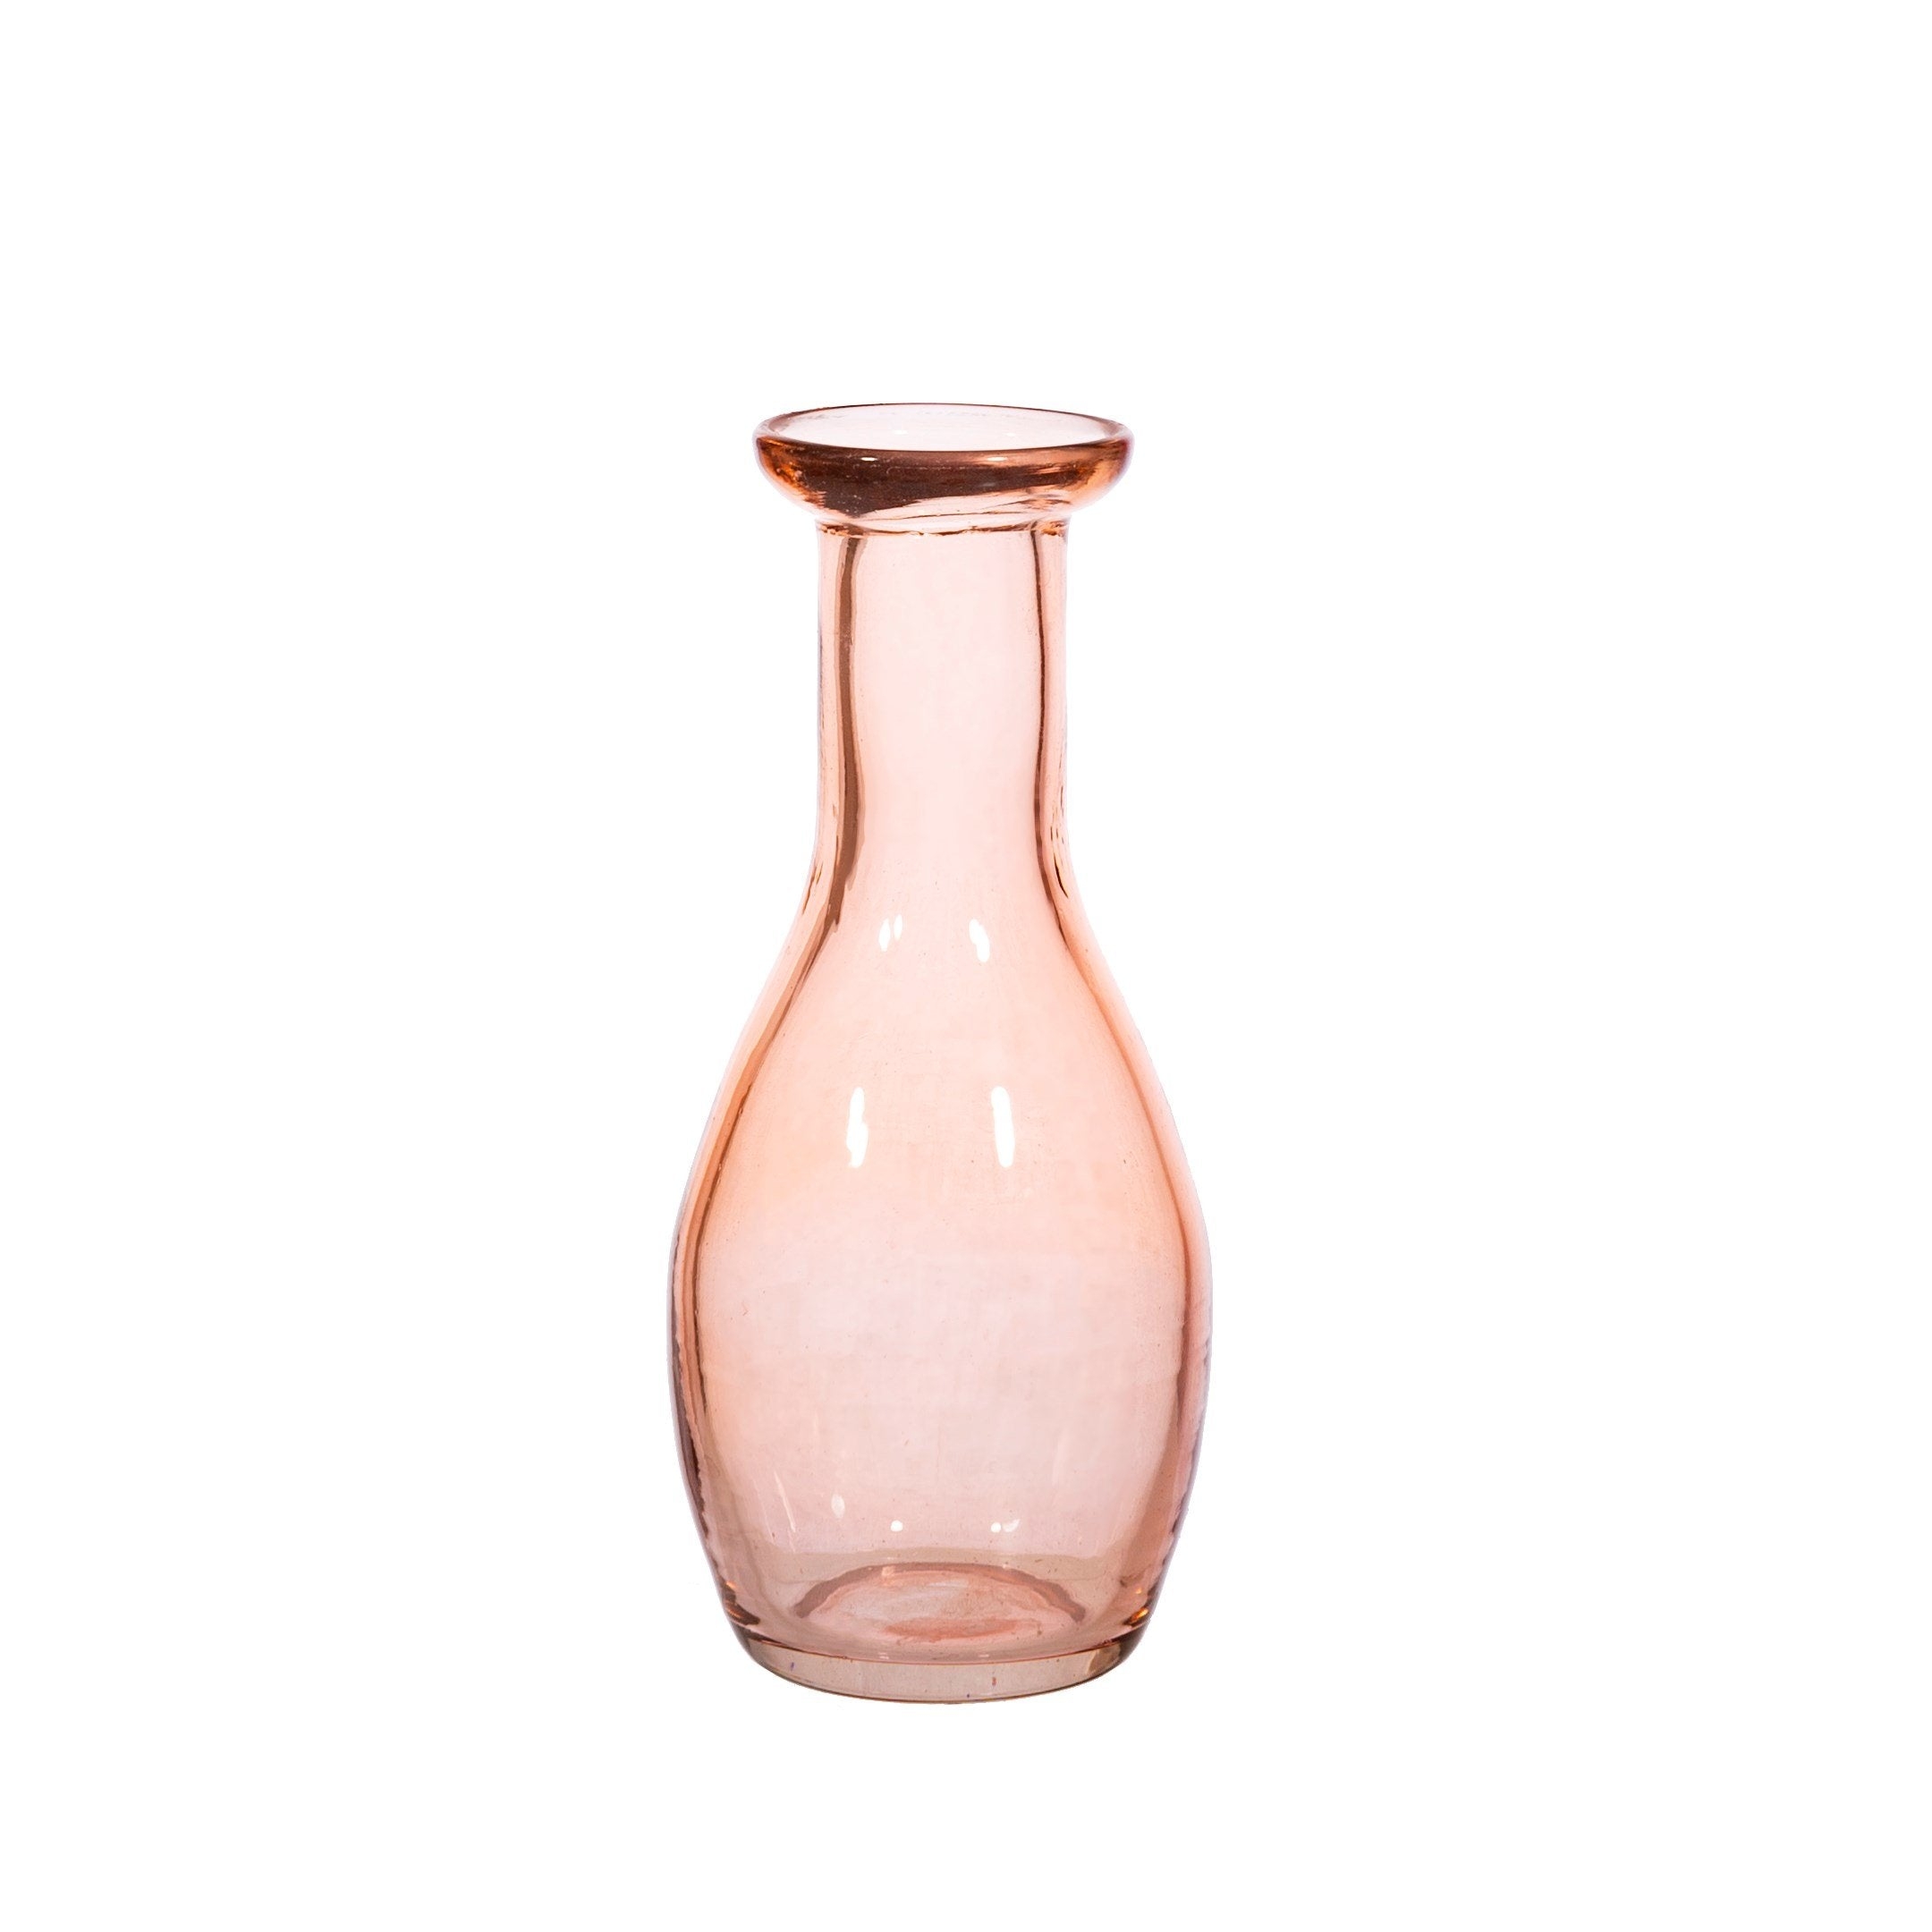 Deepa Recycled Glass Bottle Vase Pink | The Design Yard pink